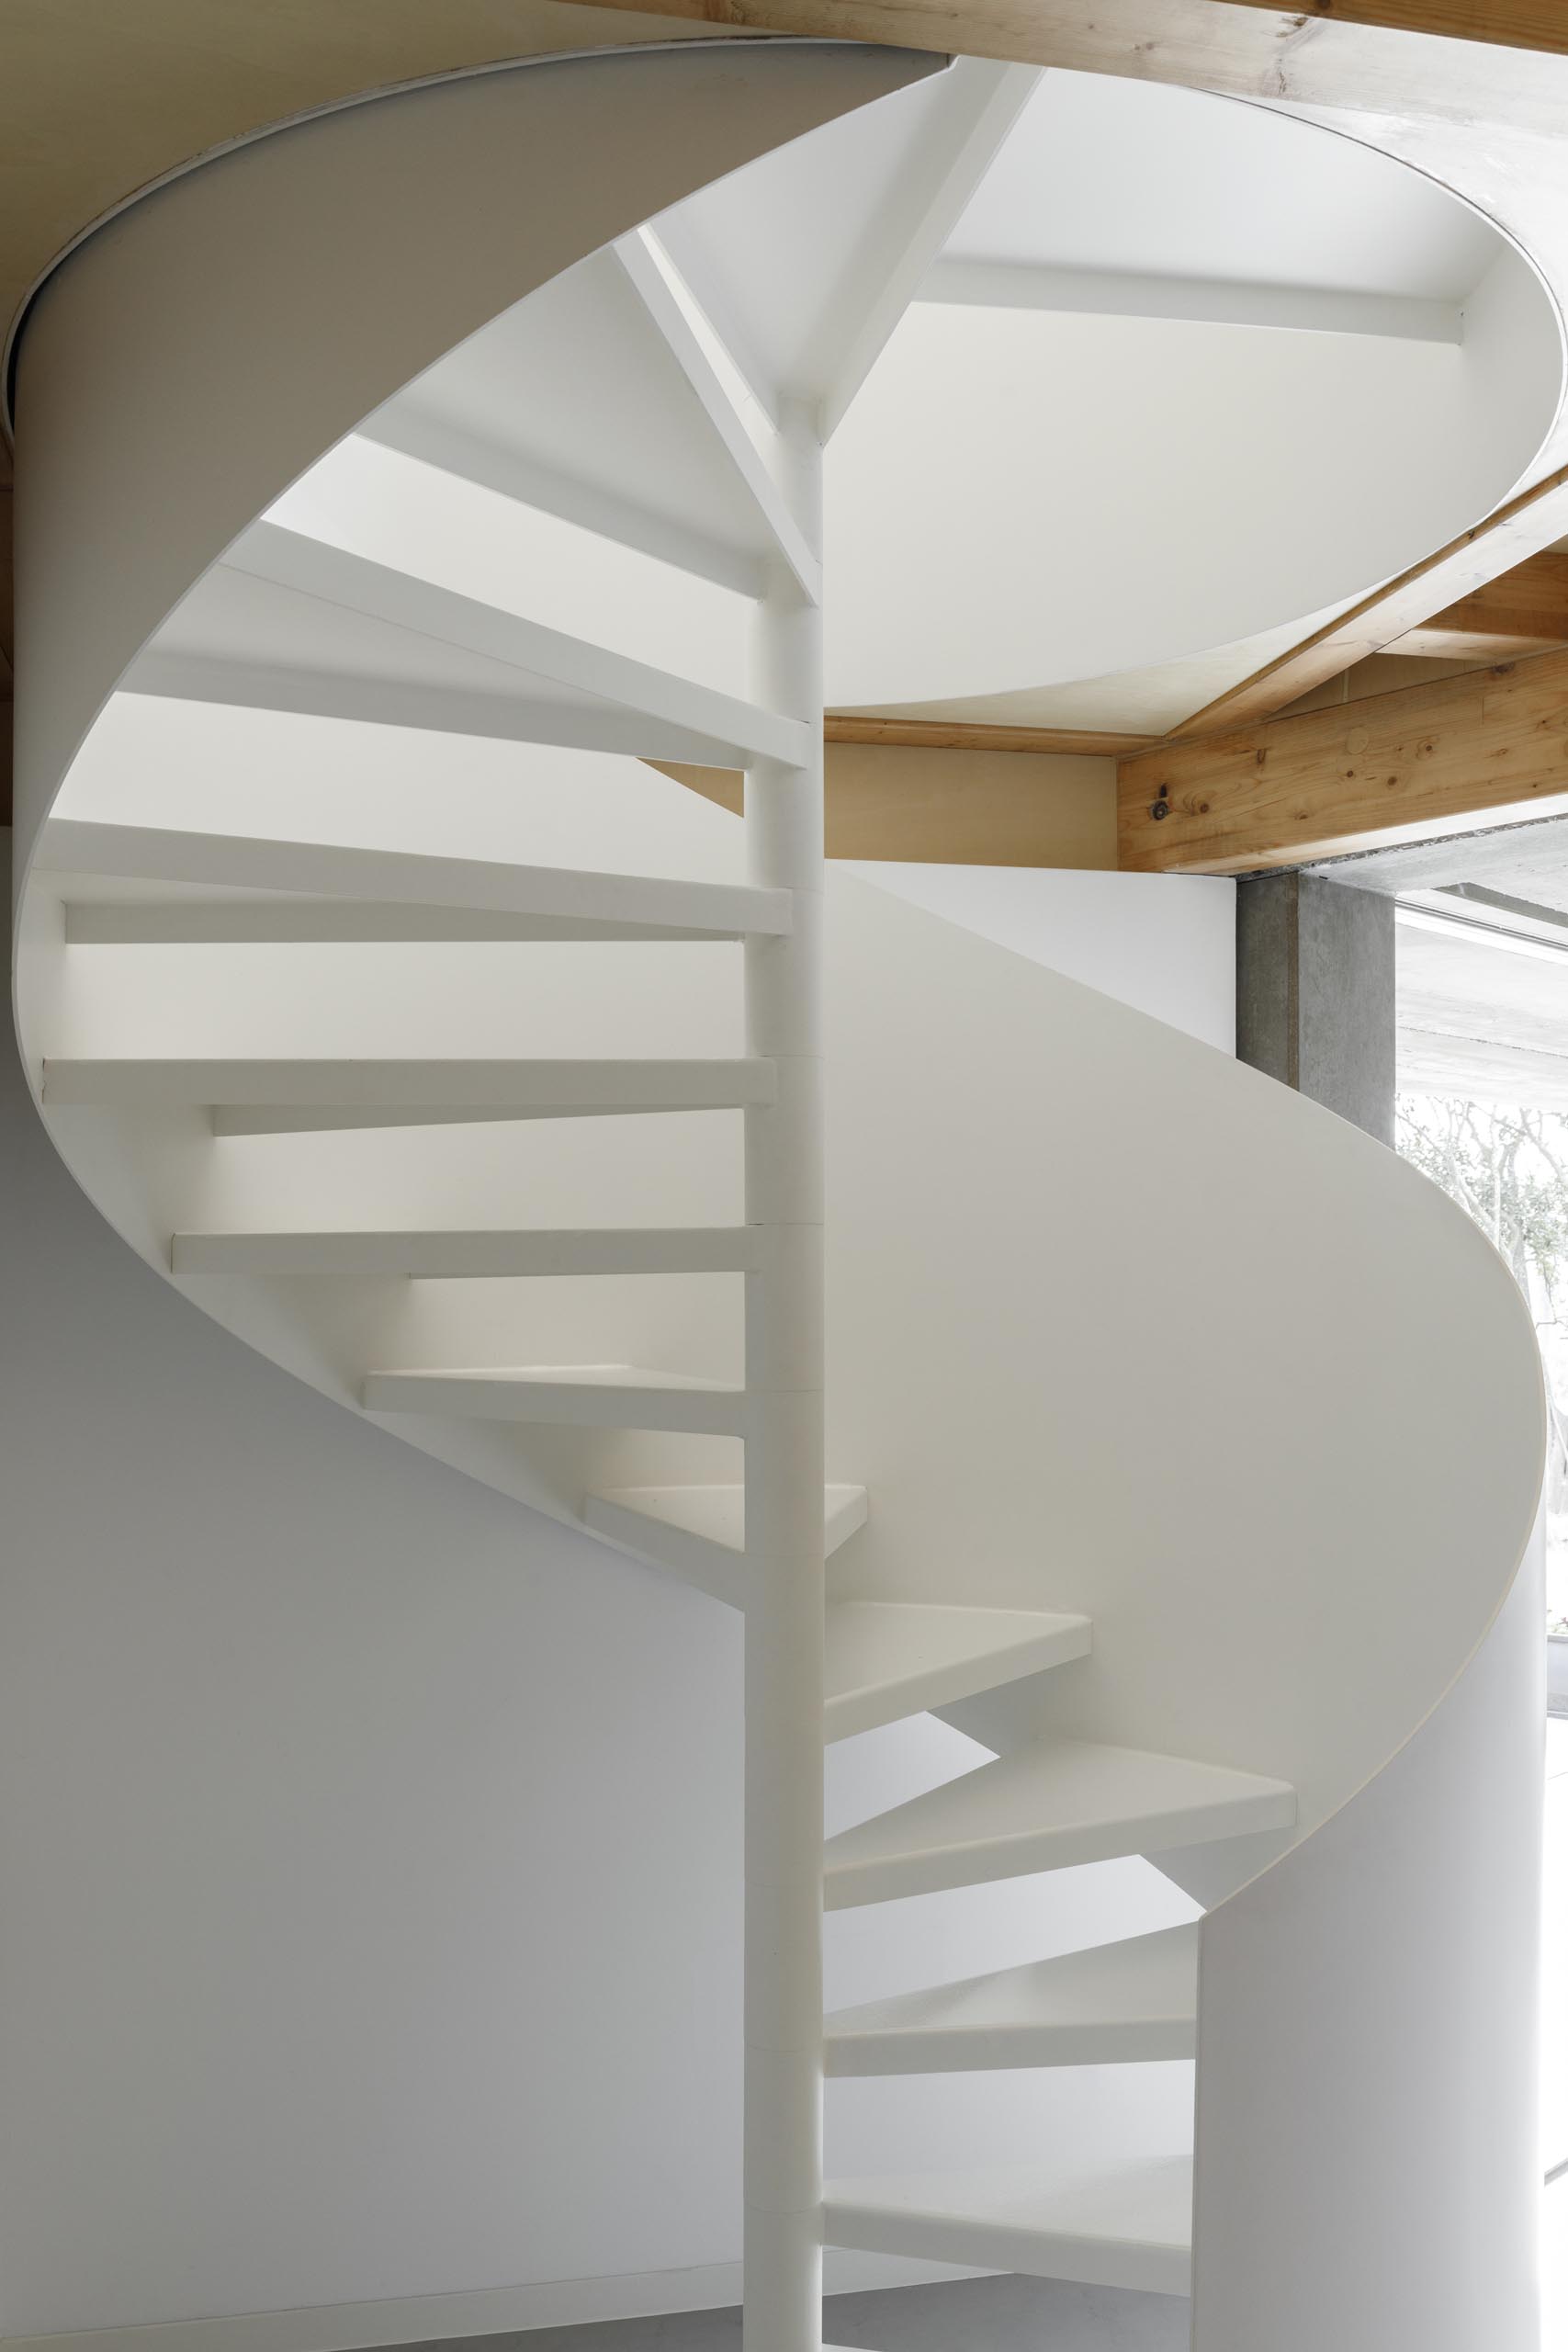 A modern home with a white spiral staircase.